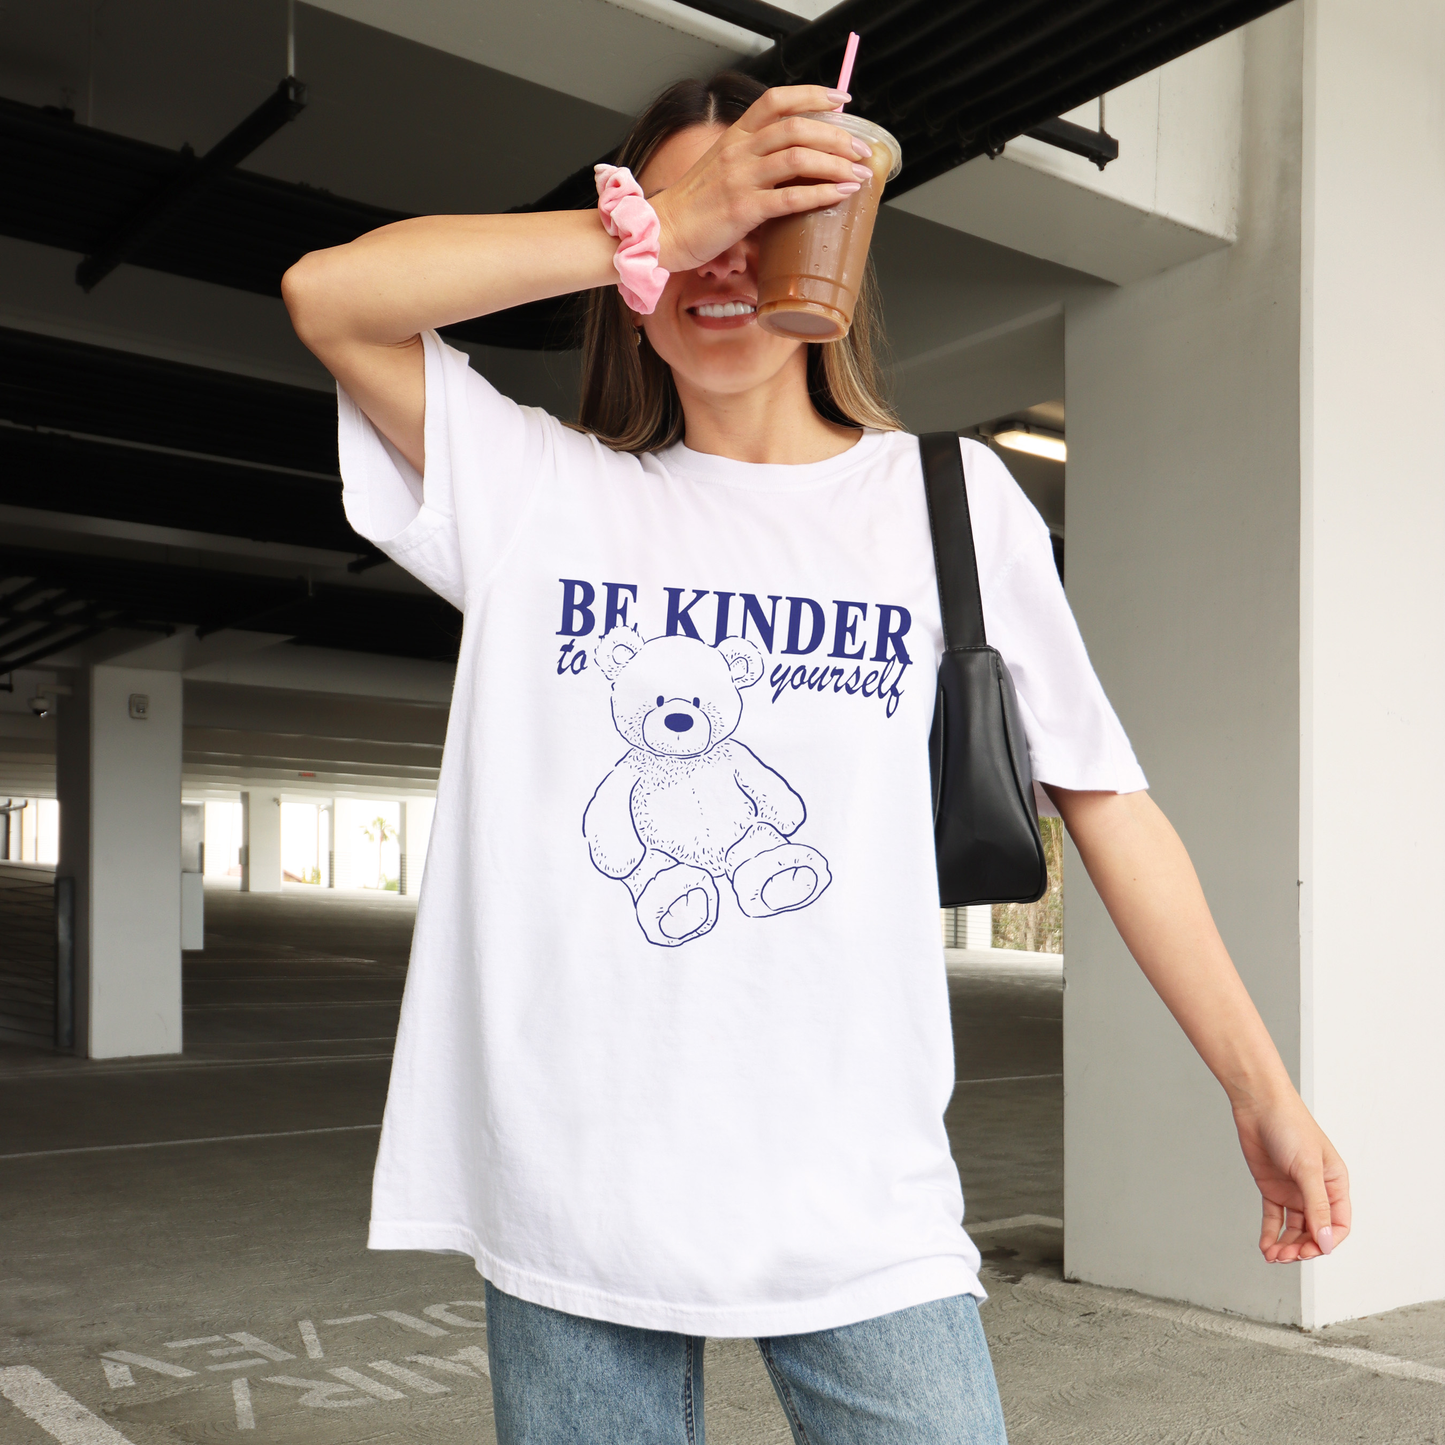 Be Kinder to Yourself Tee